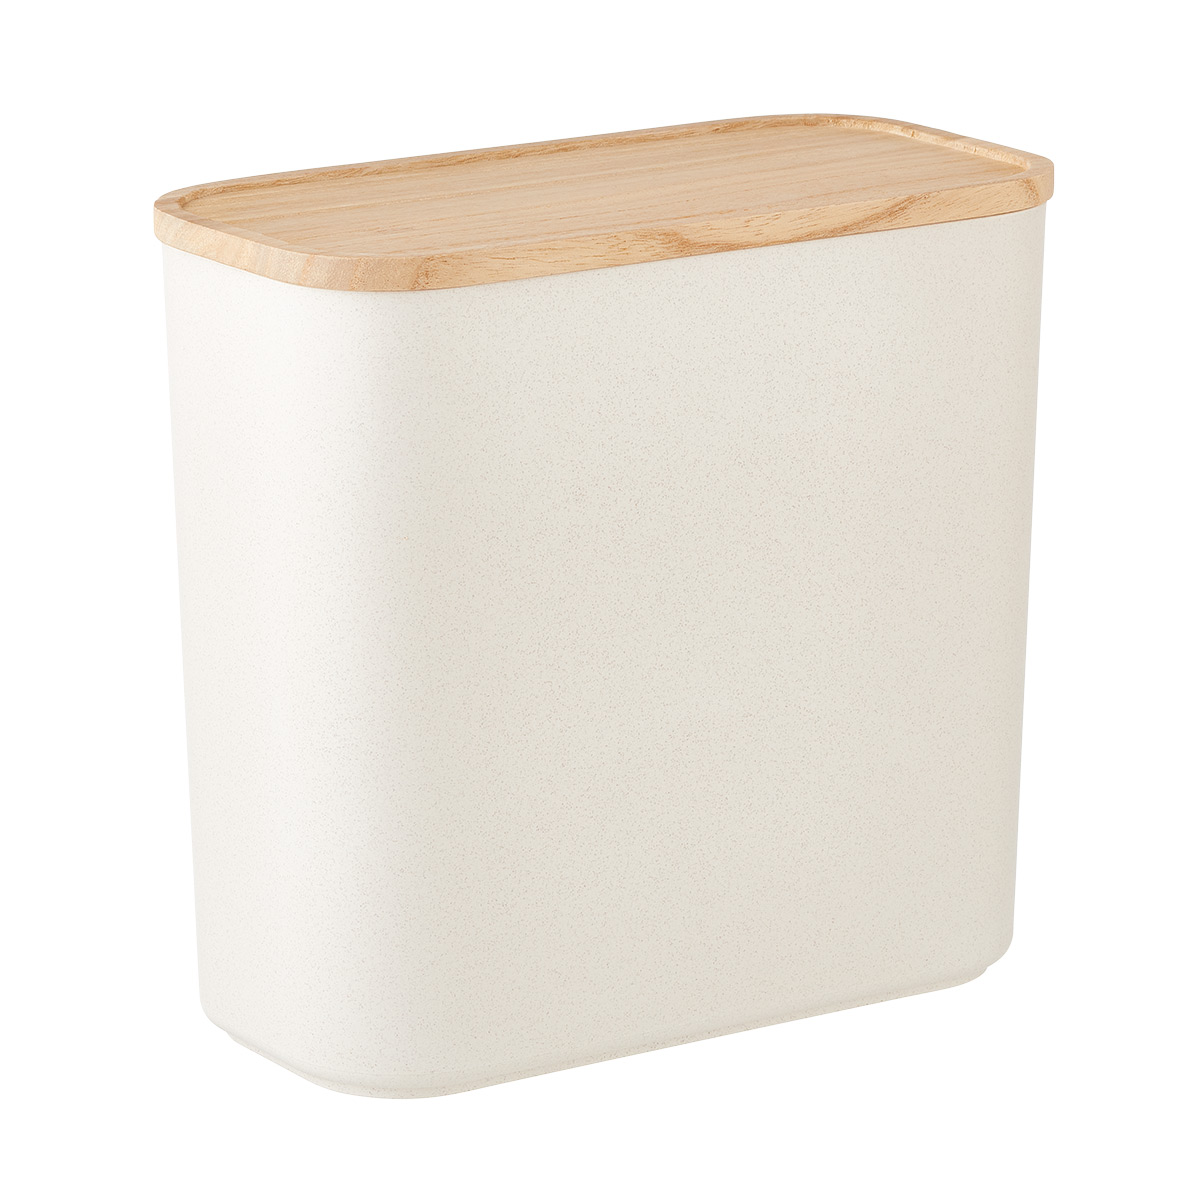 https://www.containerstore.com/catalogimages/451637/10088742_16_Cup_RO_Eco-Friendly_Cani.jpg